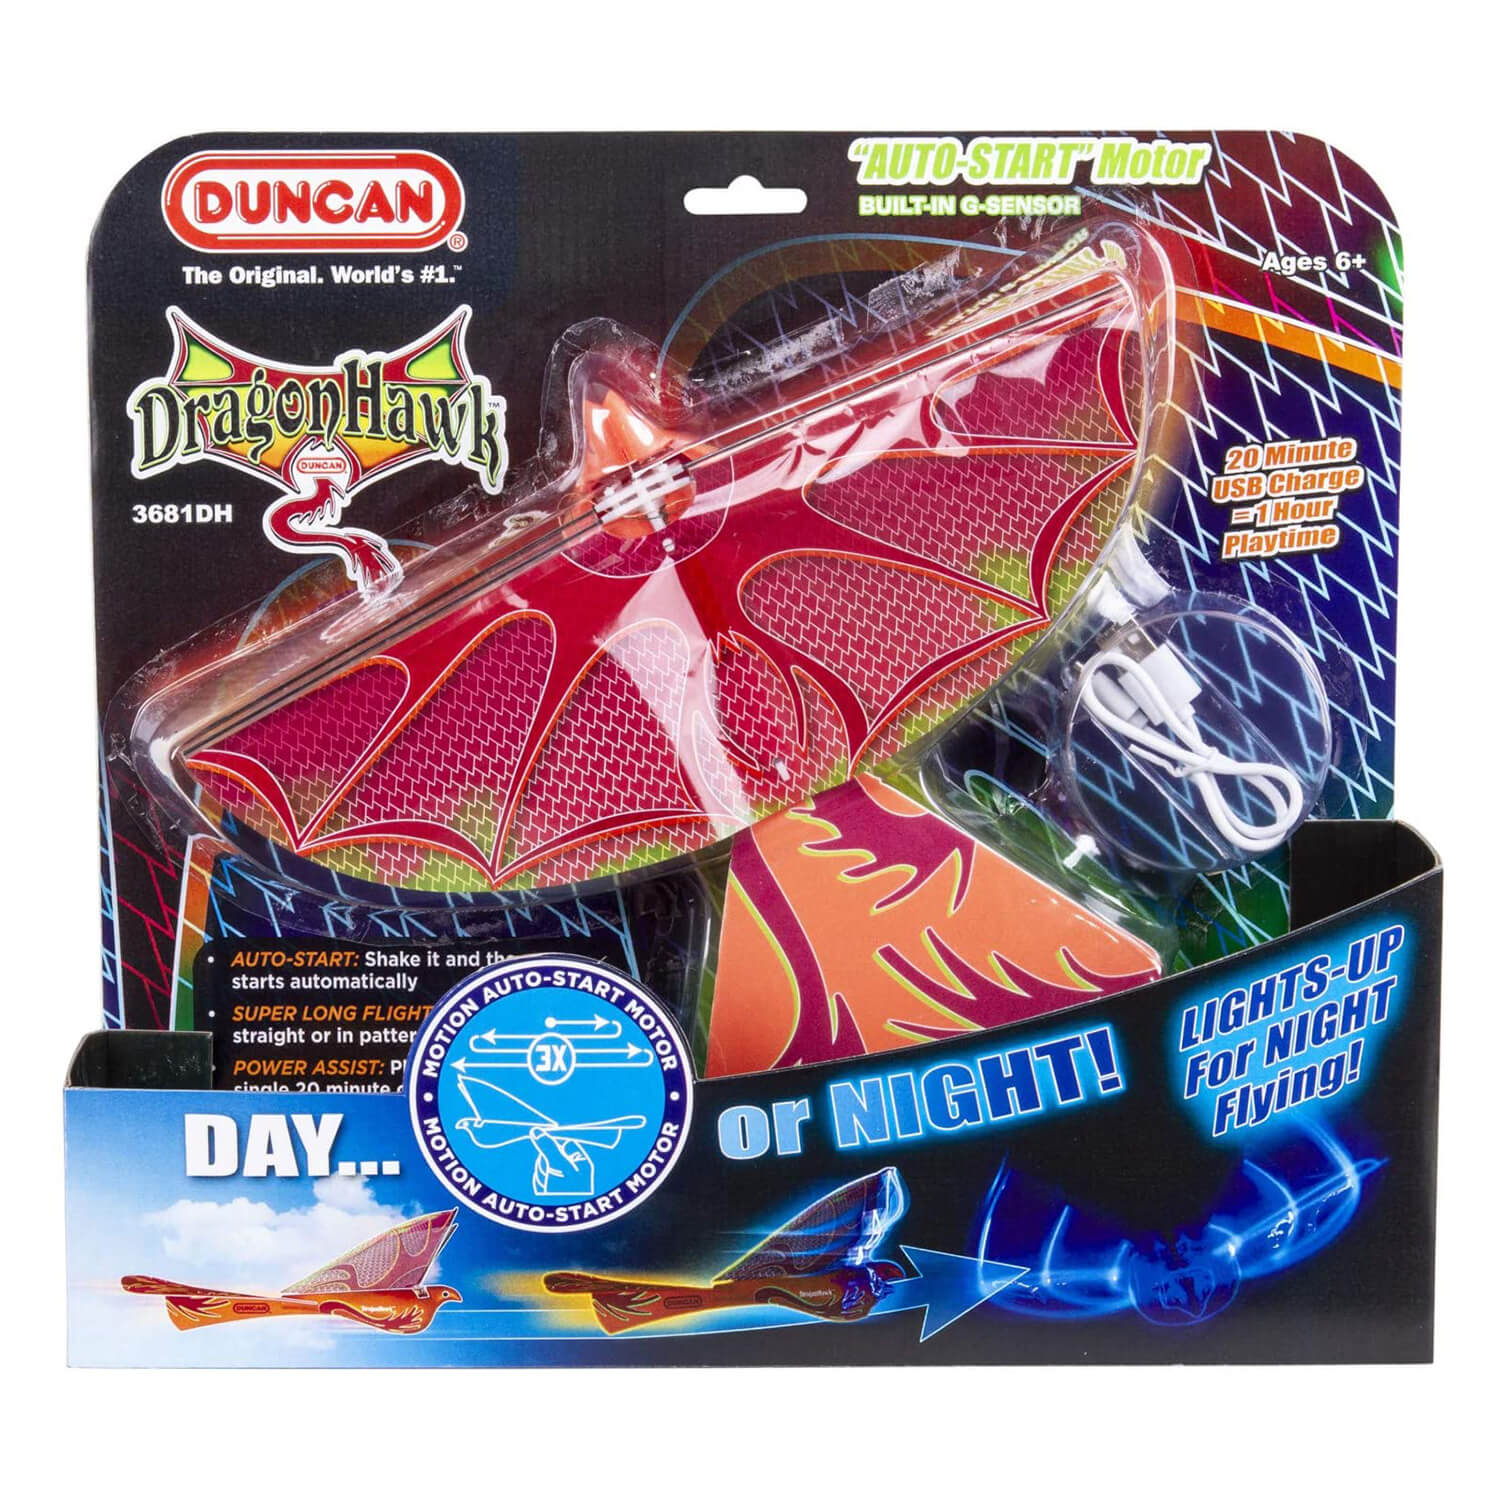 Front view of the Duncan Dragon Hawk Light-Up Bird Activity Toy packaging